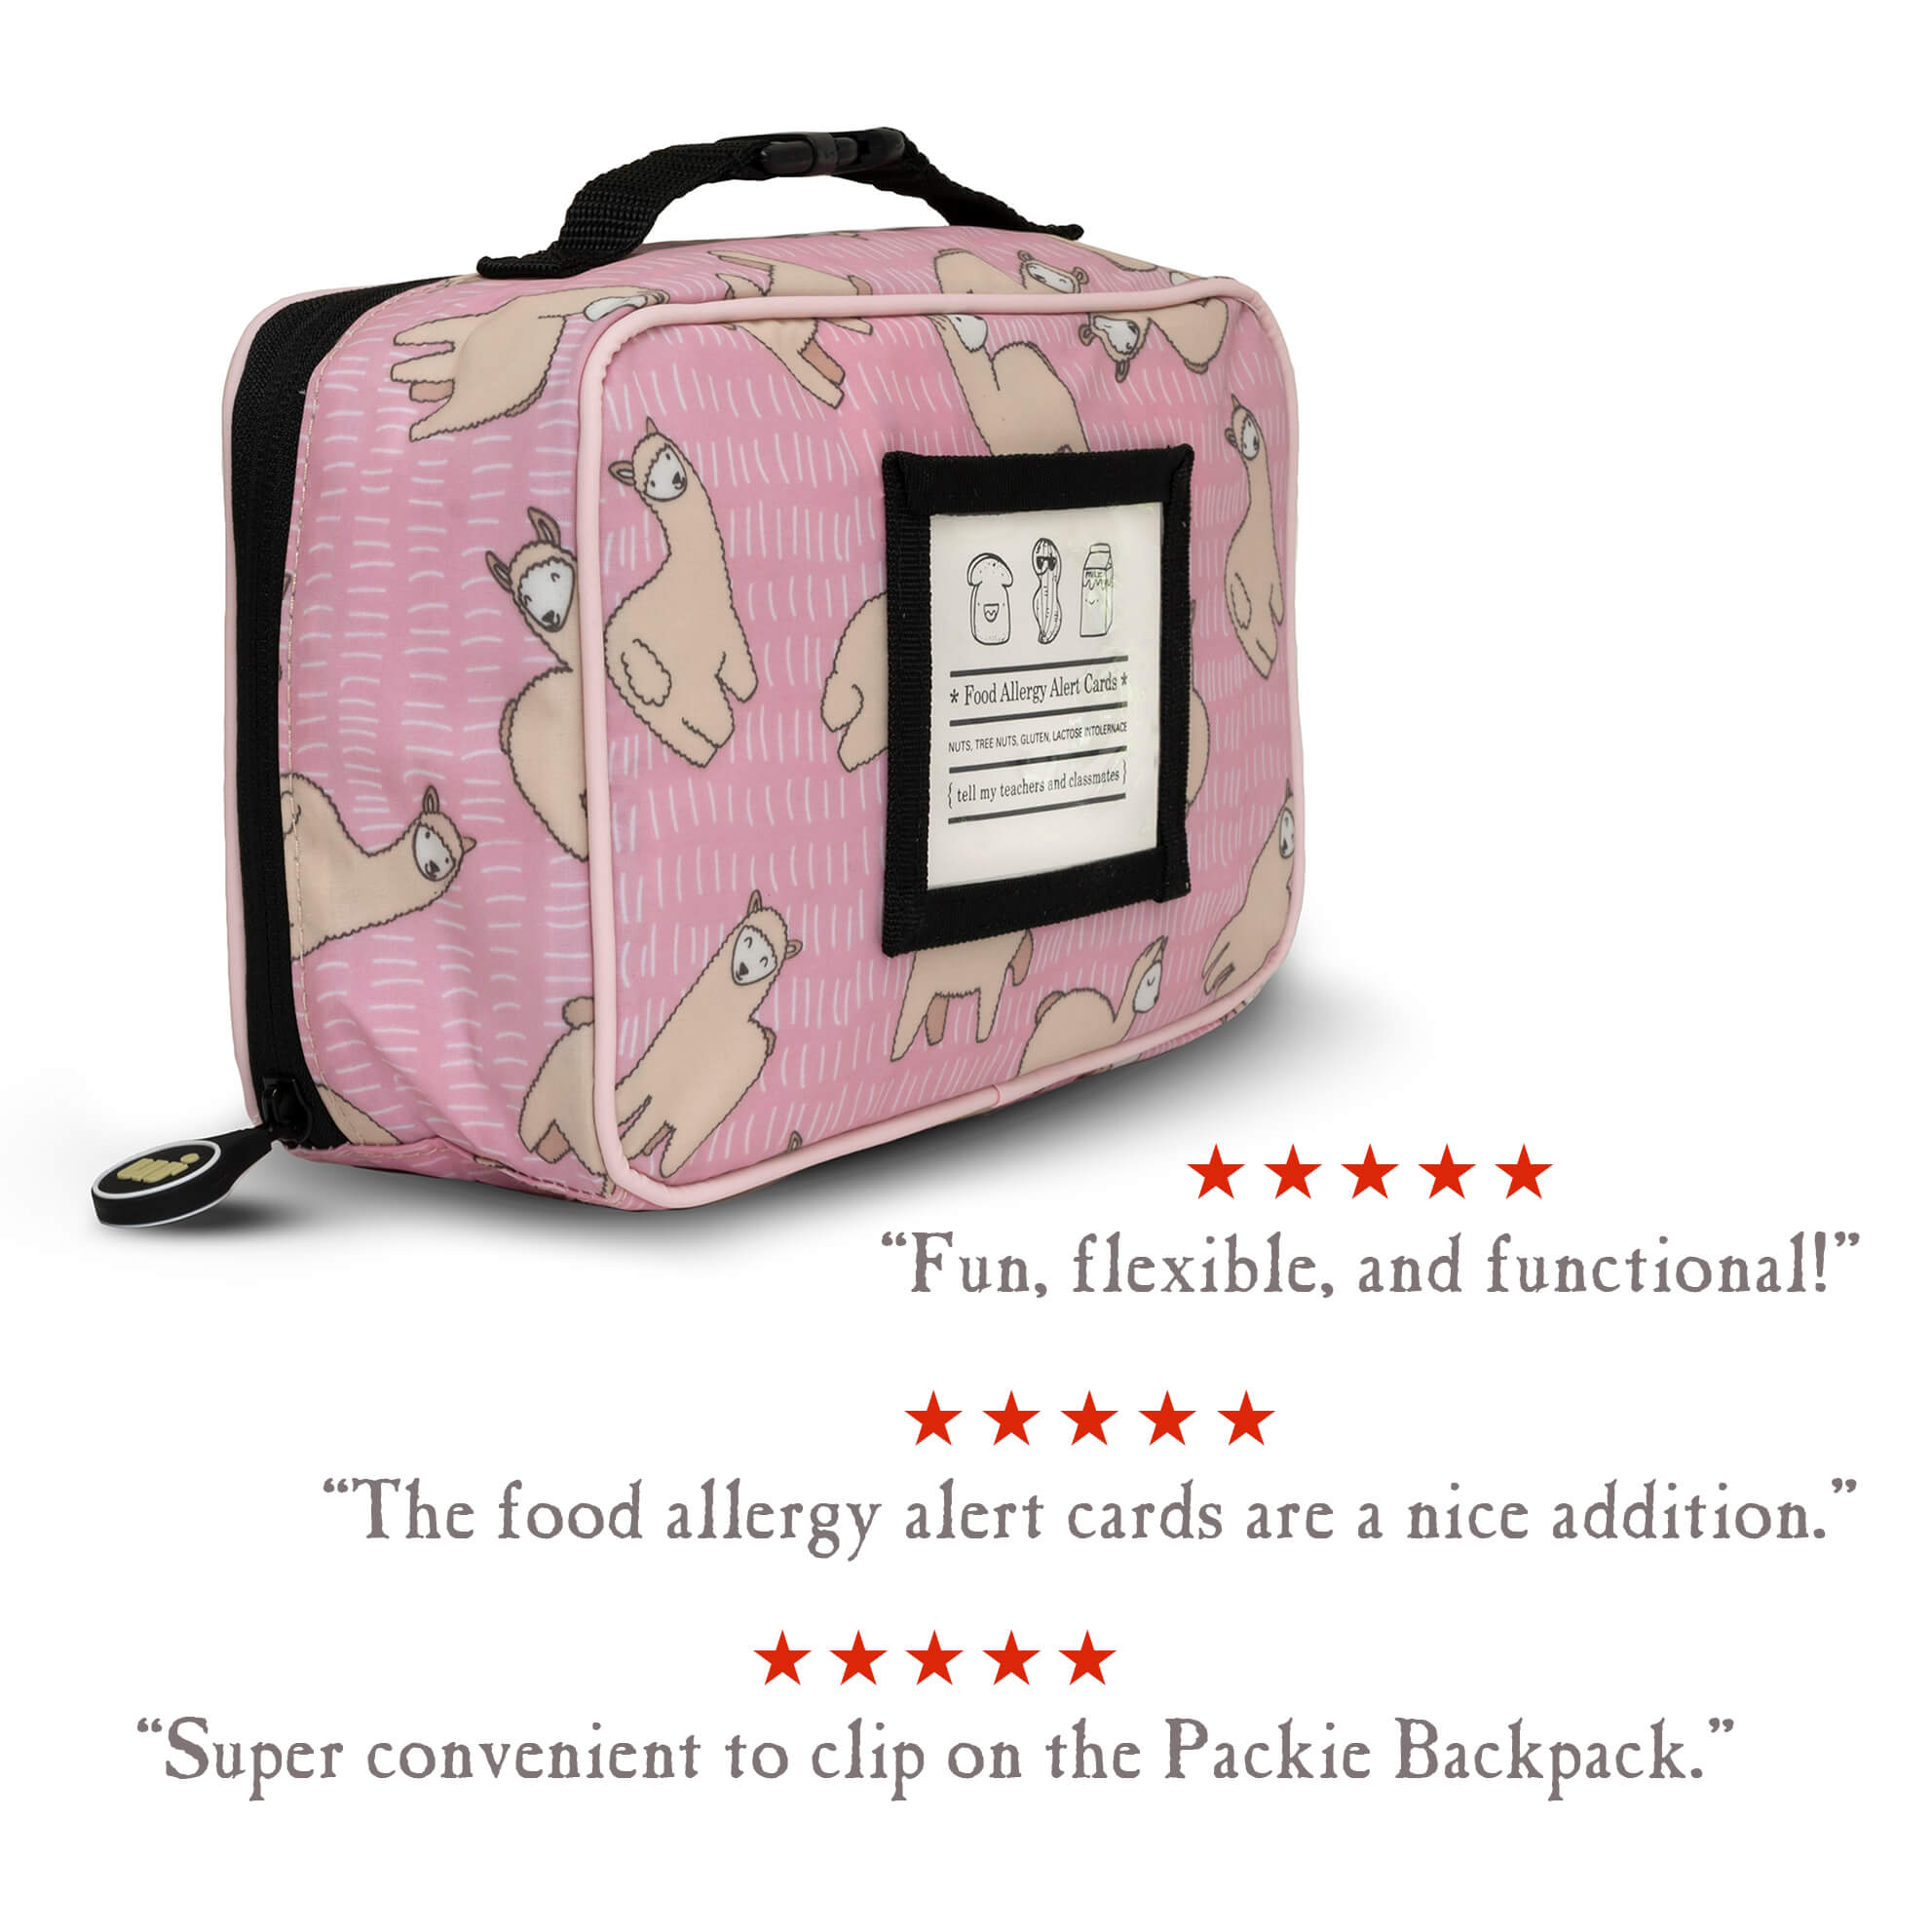 Baby Products Online - Women Dining Bag Lunch Box with Adjustable